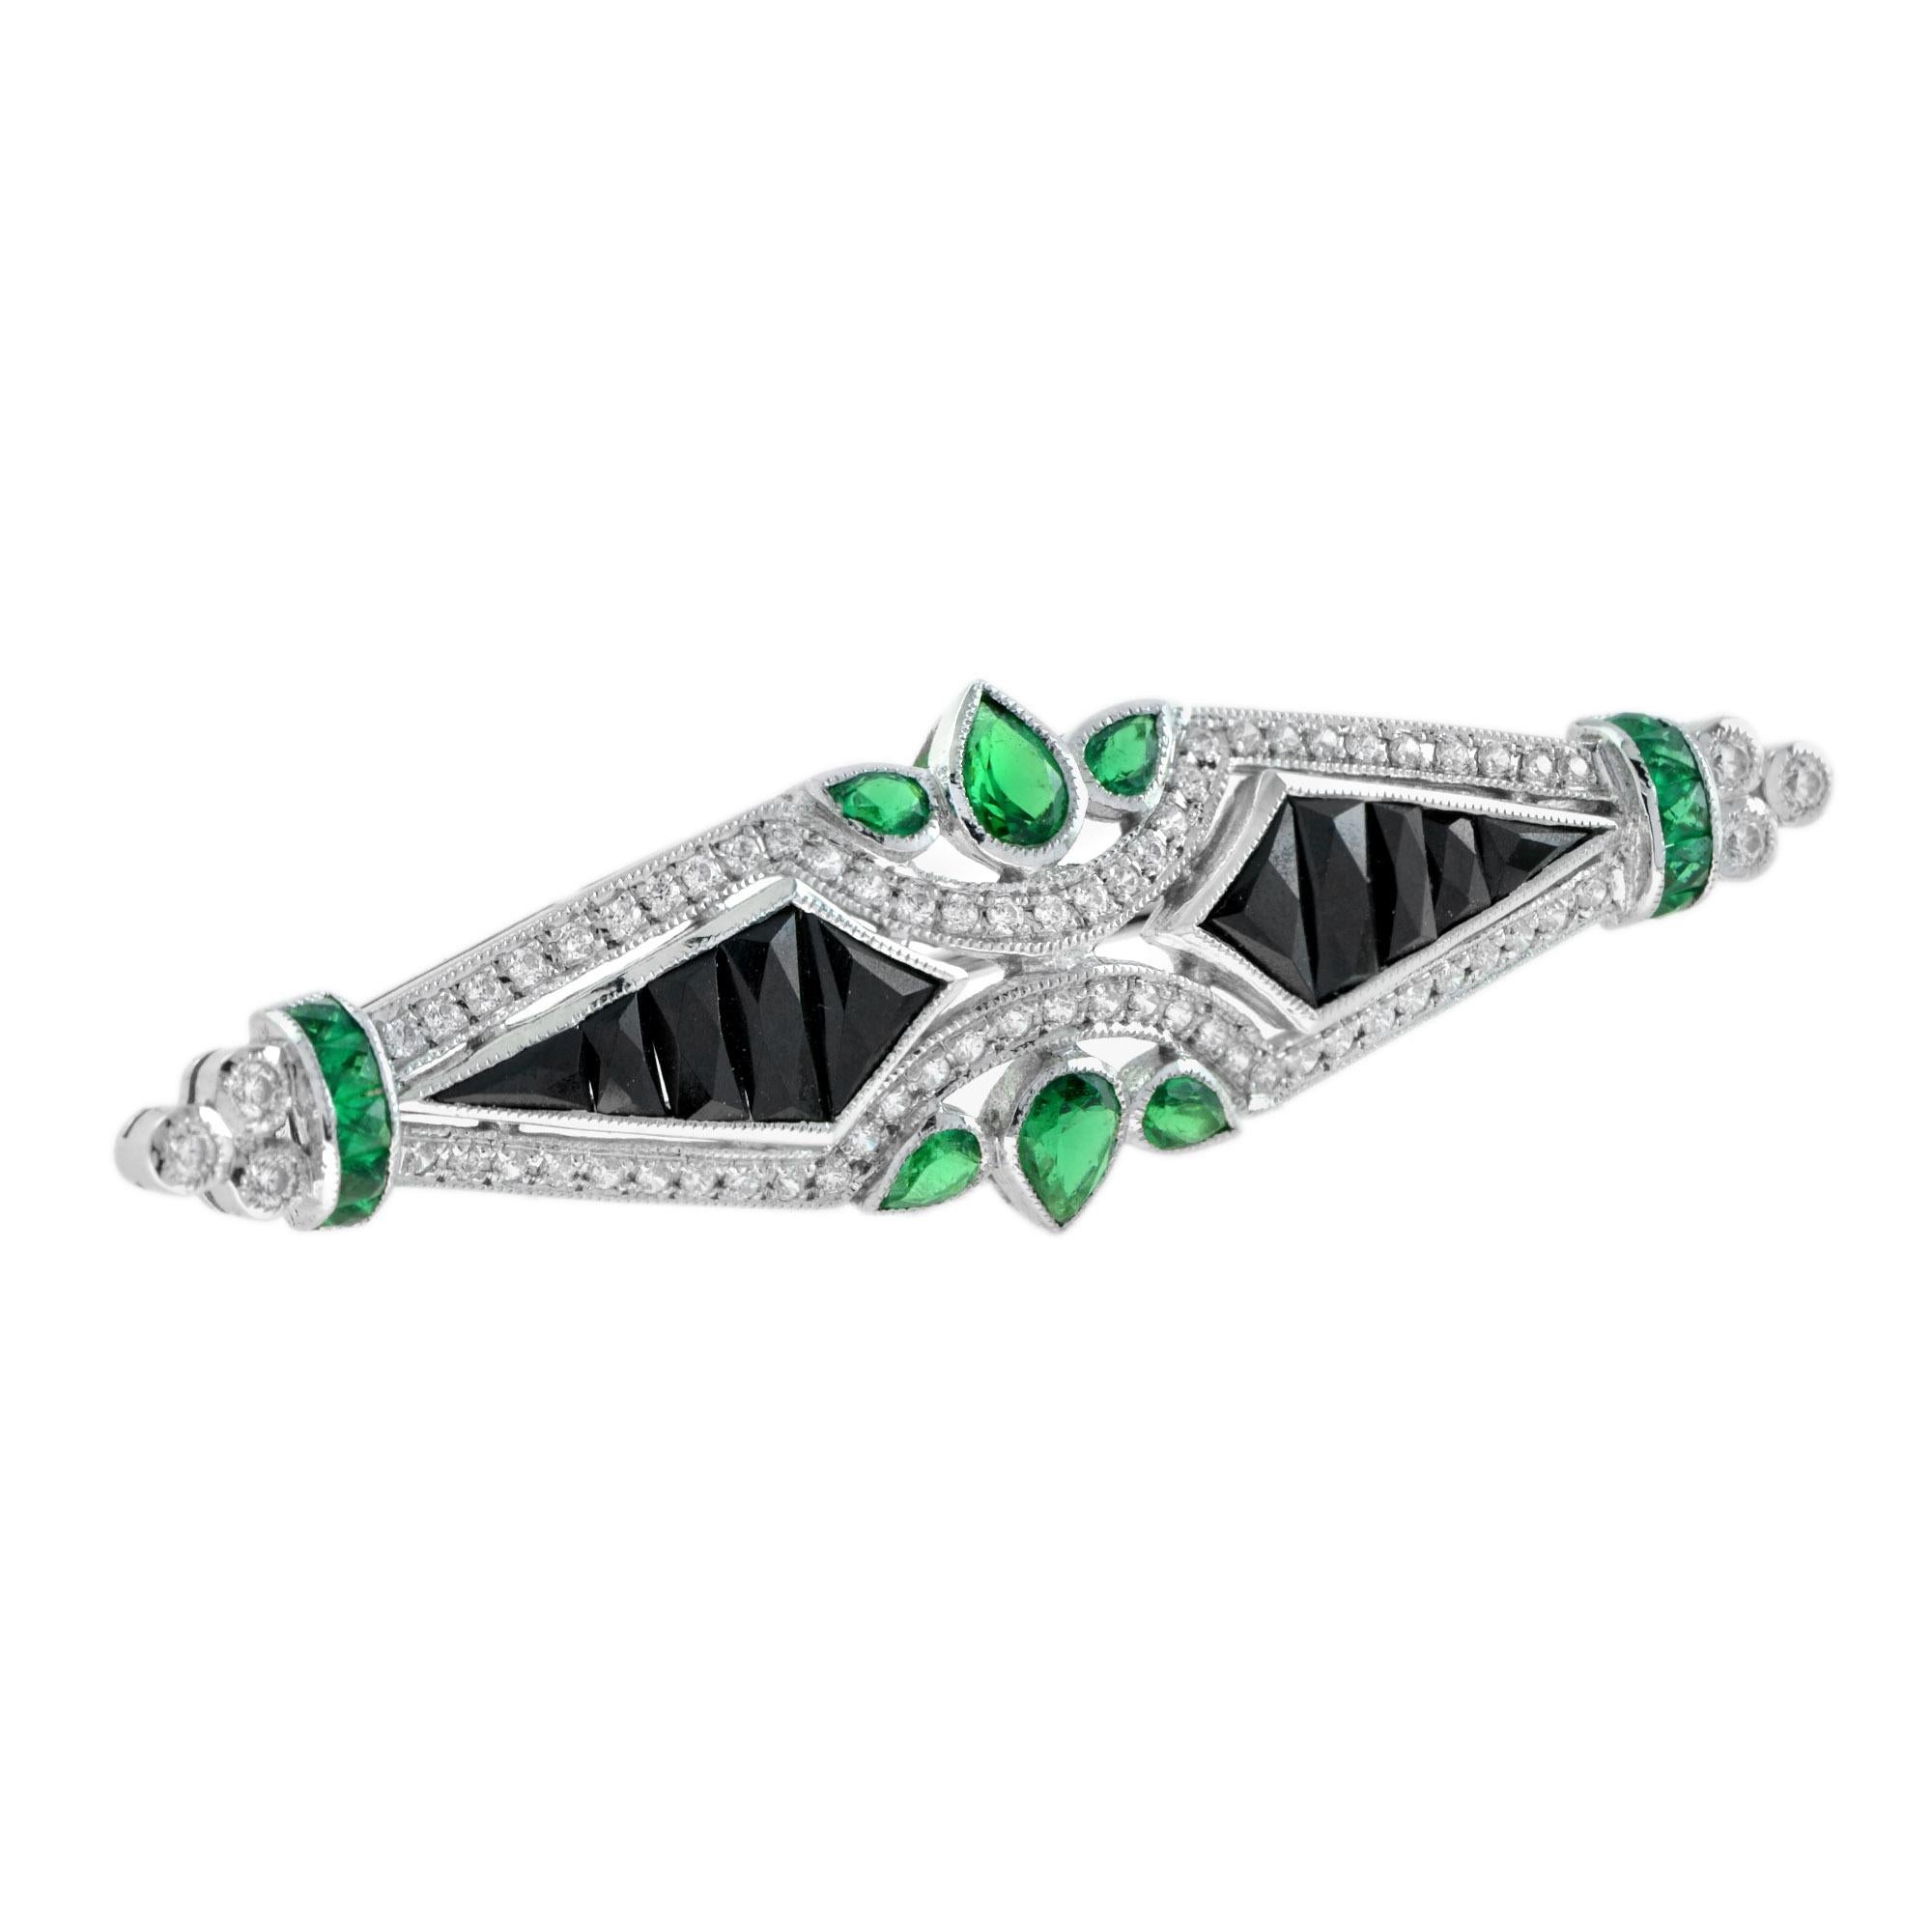 A marvelous design of symmetry along with accents of vibrant color make this Art Deco inspired brooch, masterfully hand in 14k white gold. Frosted with shimmering diamonds, on each side features French cut onyx and emeralds. Green emerald leaves are